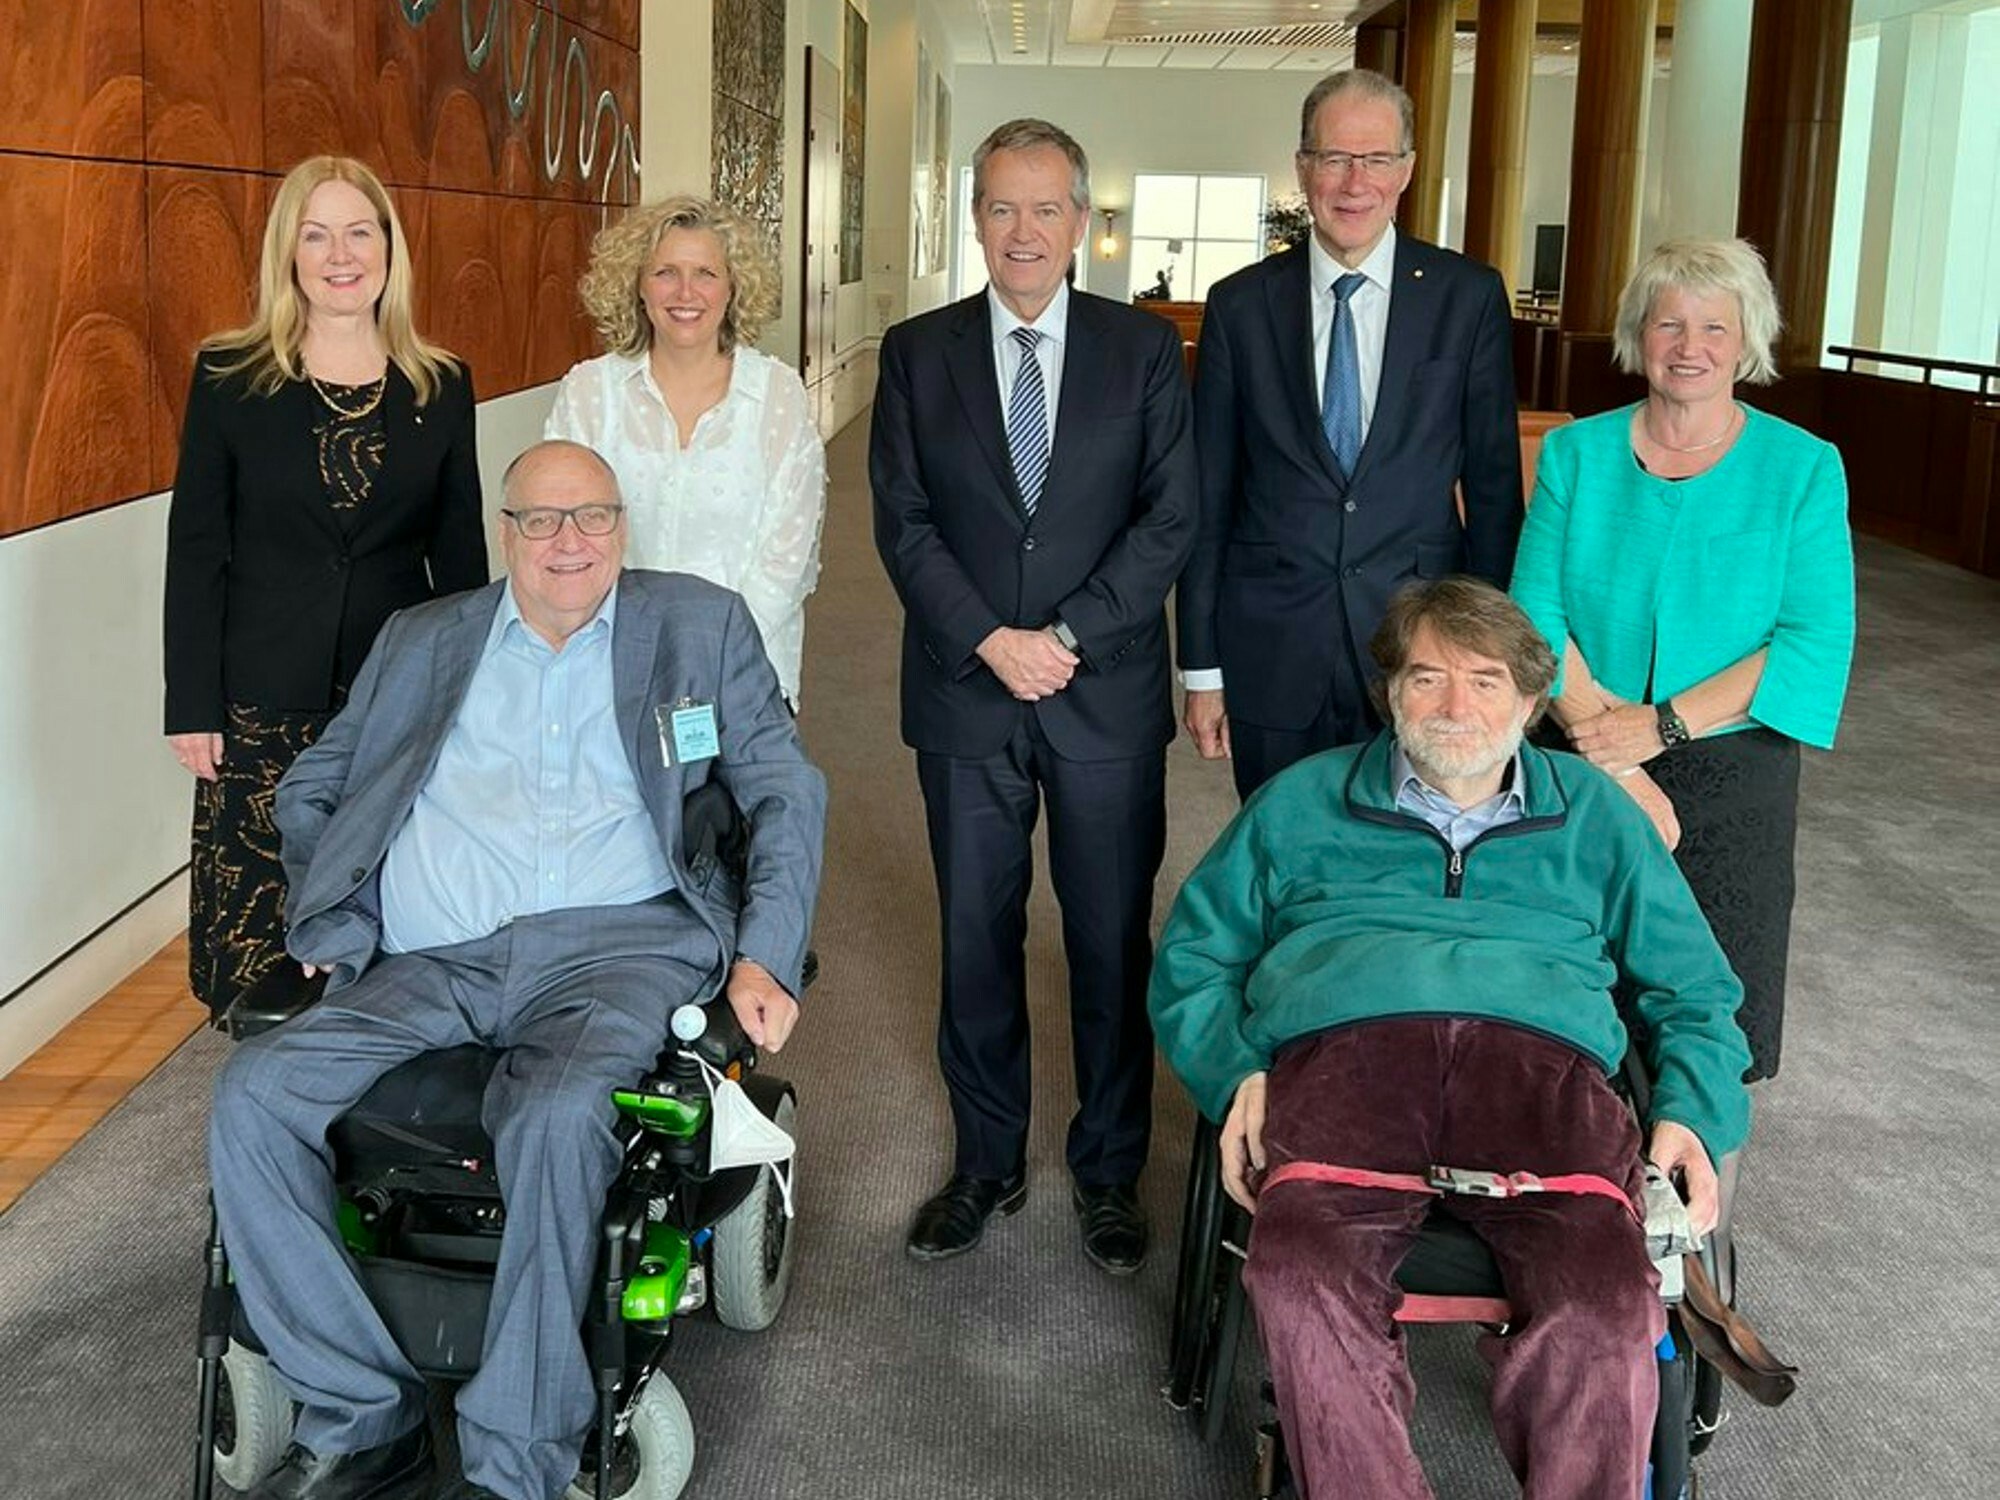 <p>NDIS Minister Bill Shorten has named Professor Bruce Bonyhady AM and Ms Lisa Paul AO PSM as co-chairs of the new review panel. [Source: Twitter]</p>
